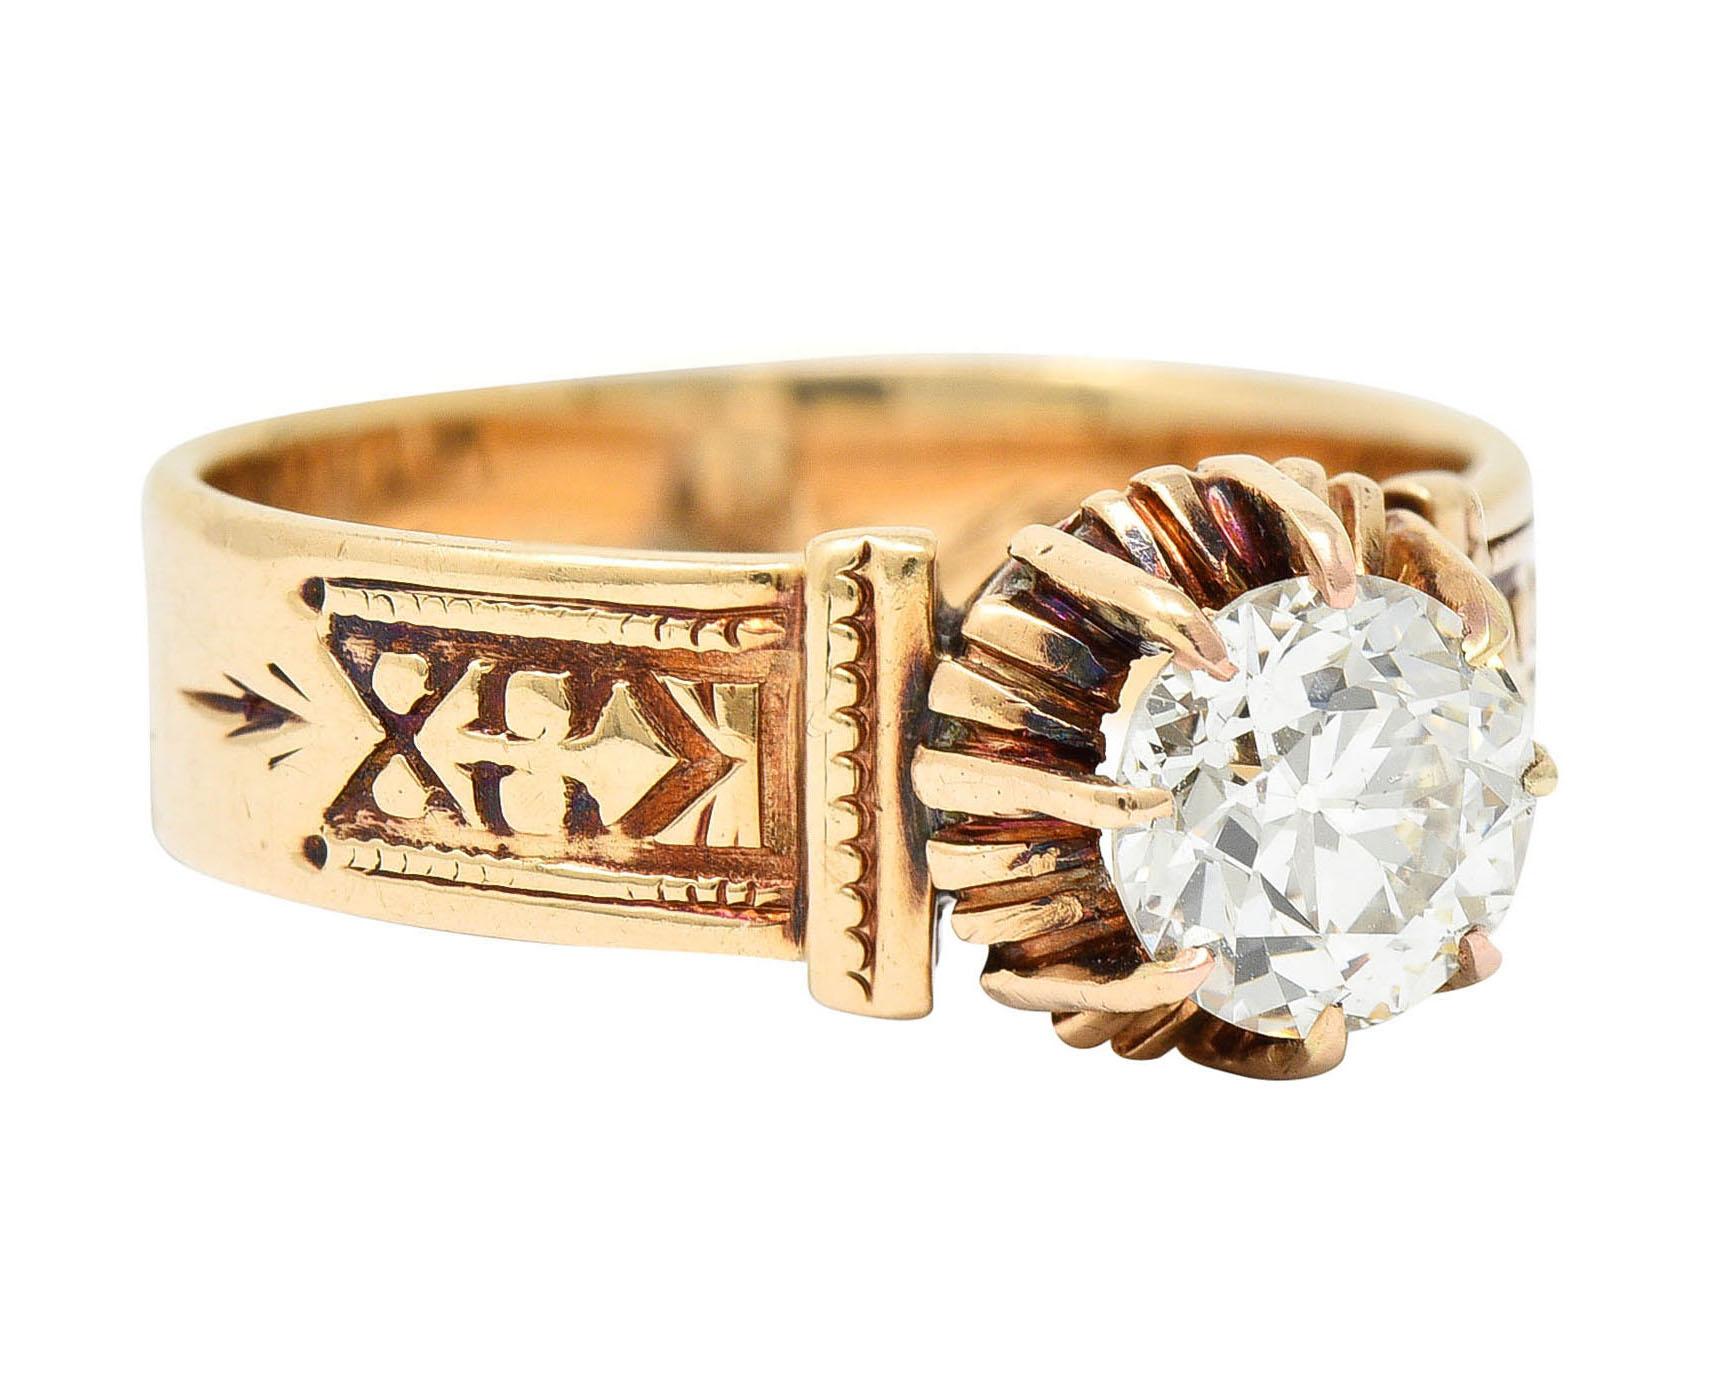 Centering an old European cut diamond weighing 0.93 carat - L color and SI2

Talon set in a high and stylized head and flanked by deeply engraved shoulders

Depicting hand applied milgrain and a fleur-de-lis motif

Tested as 14 karat gold

With